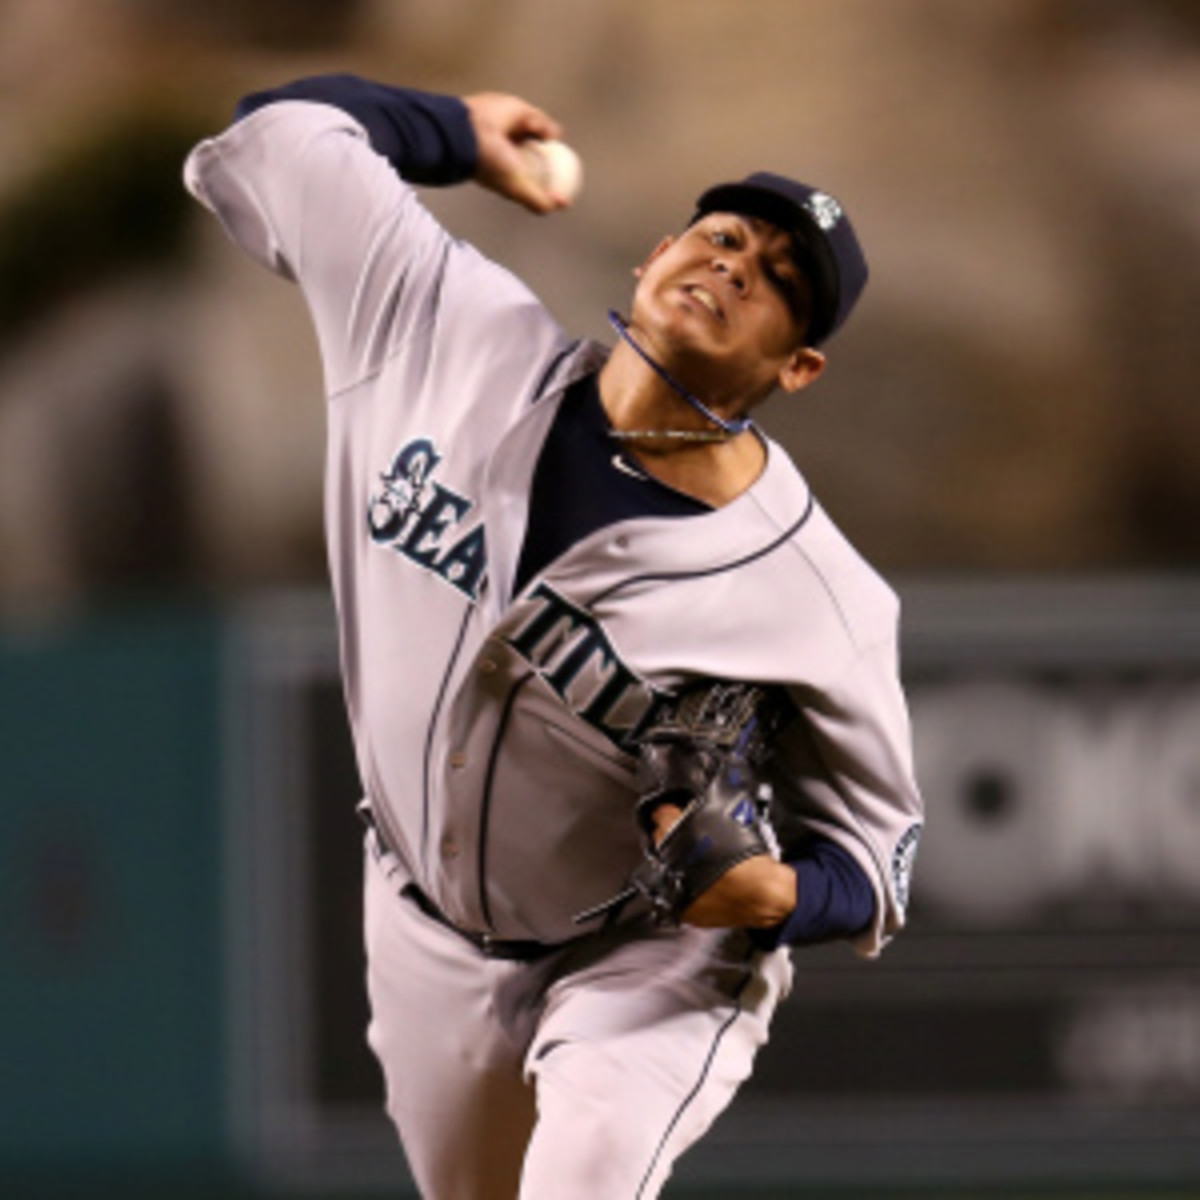 The Seattle Mariners are weighing a $100 million extension for Felix Hernandez. (Stephen Dunn/Getty Images)